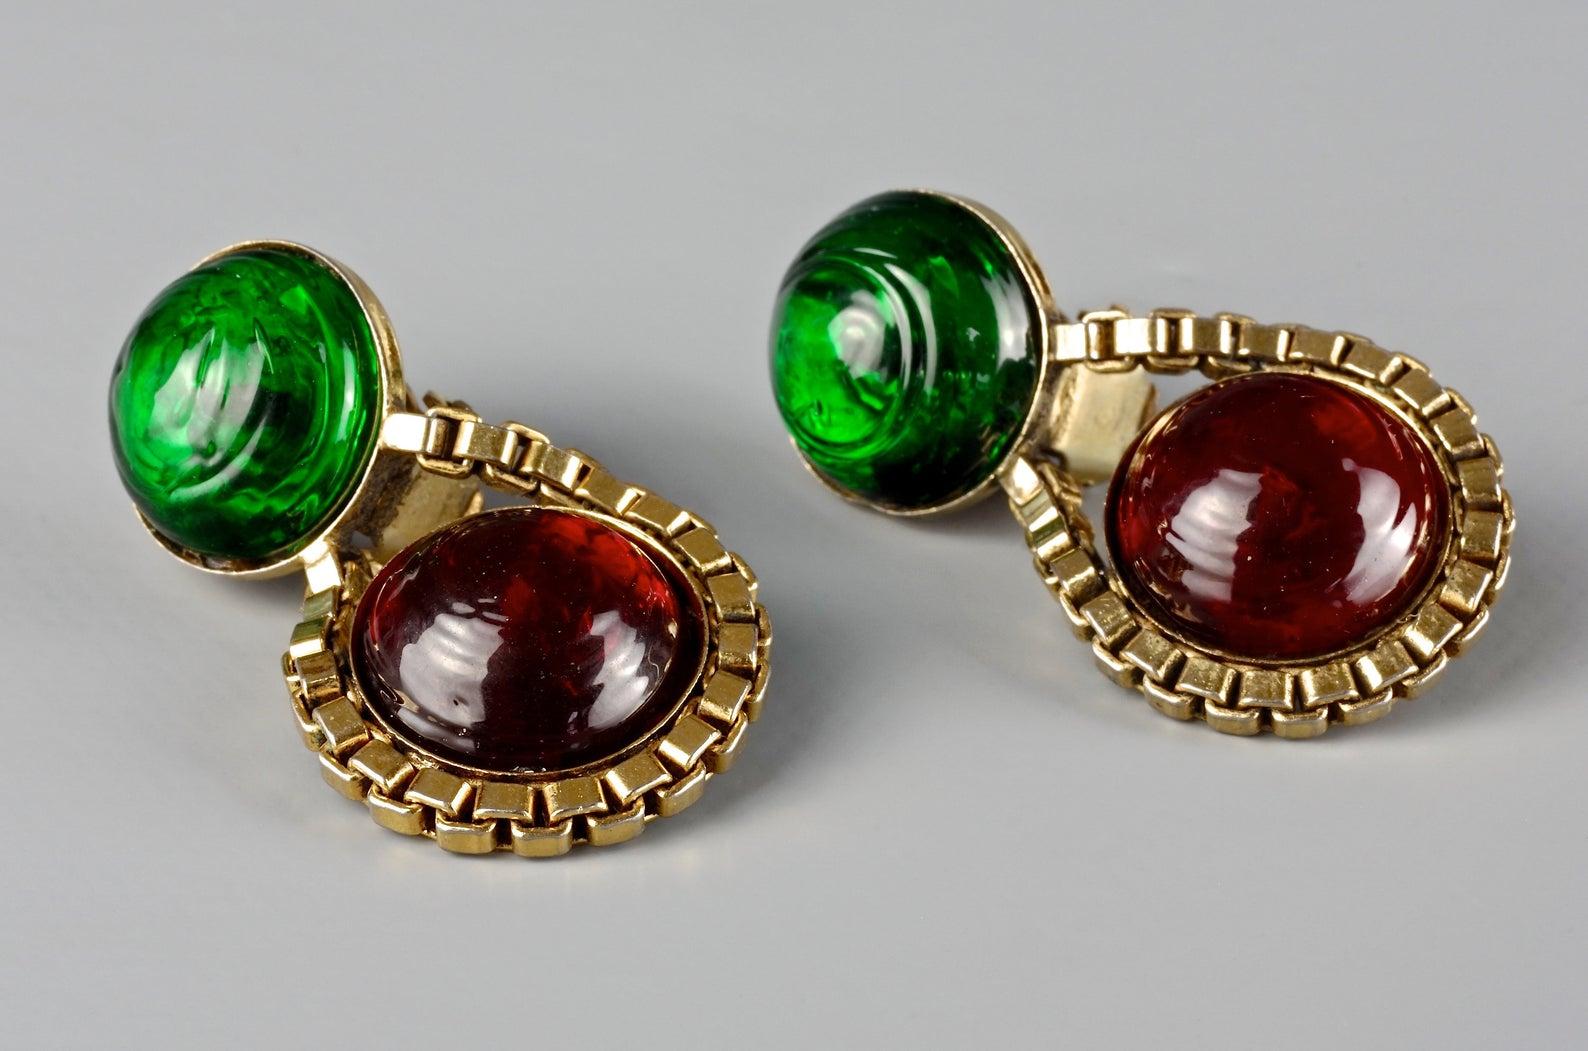 Vintage 1984 CHANEL Green Red Gripoix Poured Glass Drop Earrings

Measurements:
Height: 1.65 inches (4.2 cm)
Width: 0.87 inch (2.2 cm)
Weight per Earring: 12 grams

Features:
- 100% authentic CHANEL.
- Iconic green and red gripoix/ poured glass